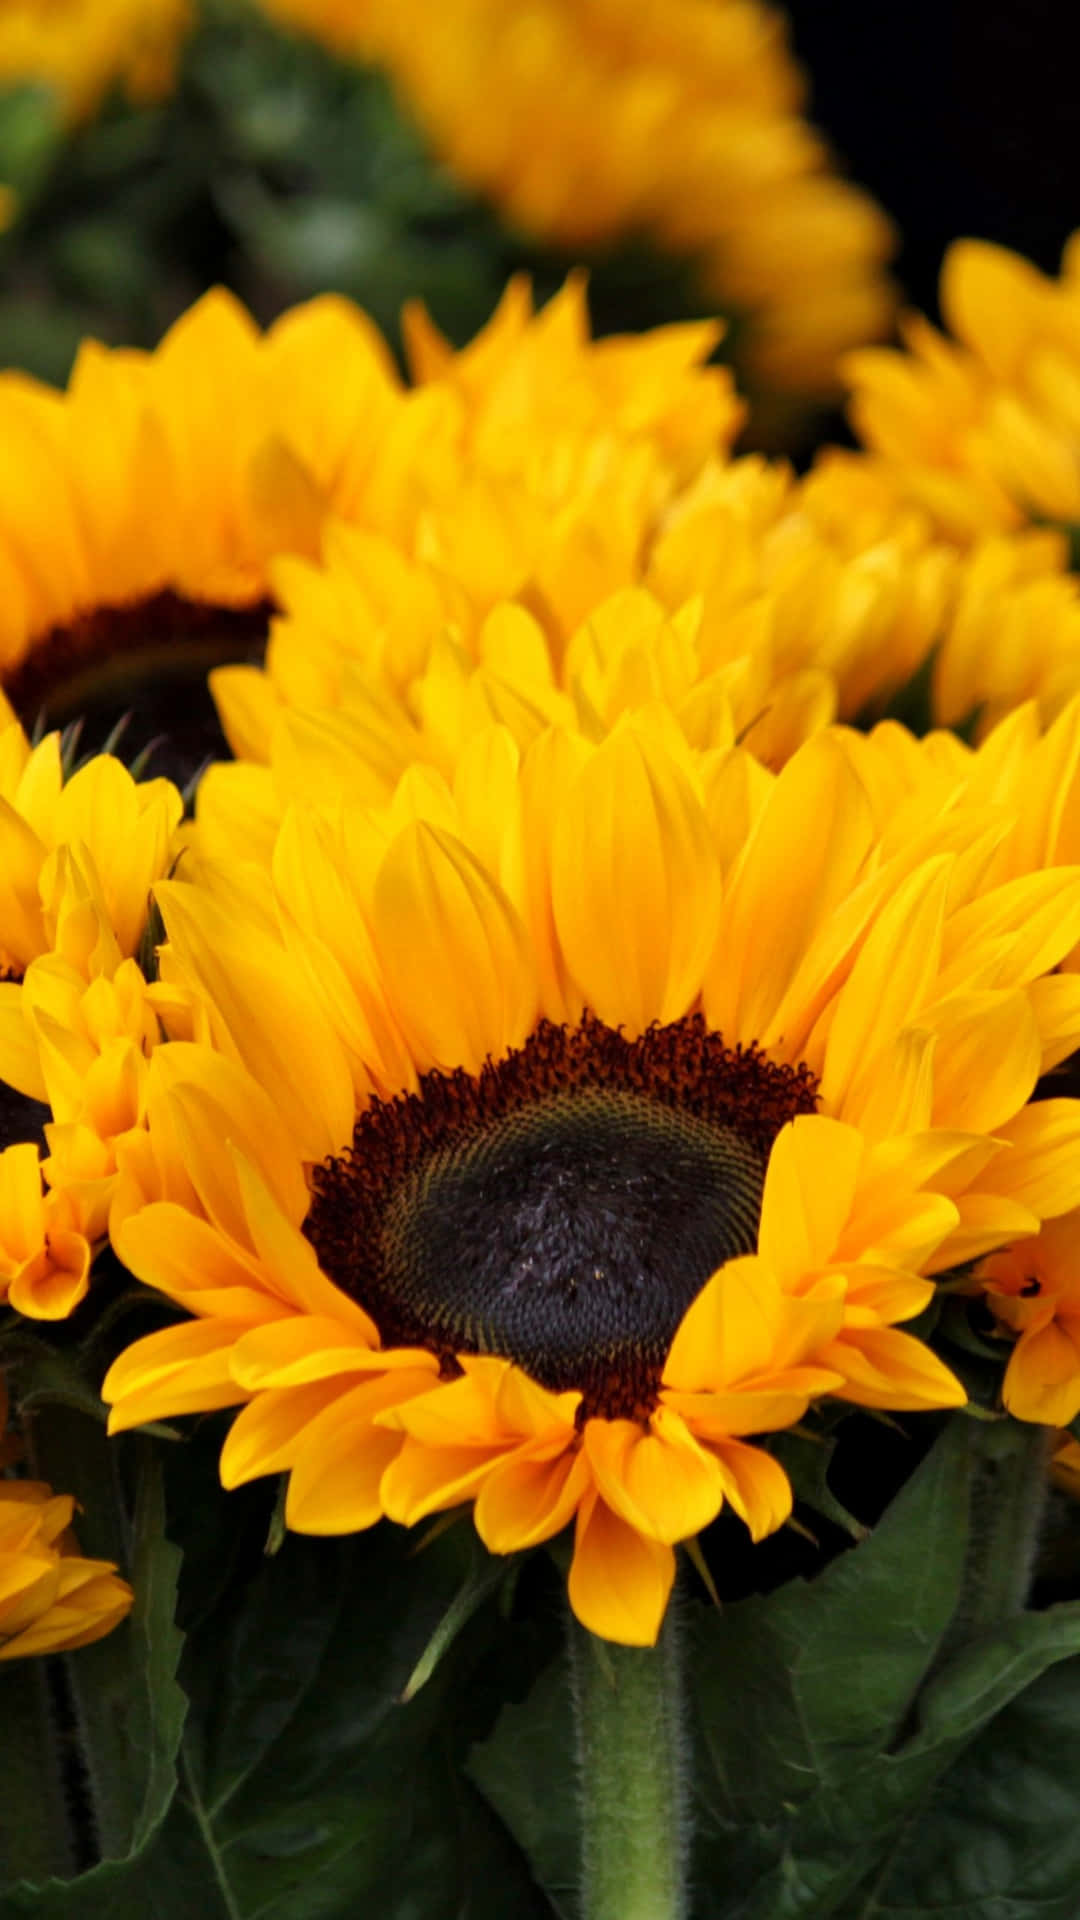 Brighten up your day with a Sunflower Phone! Wallpaper